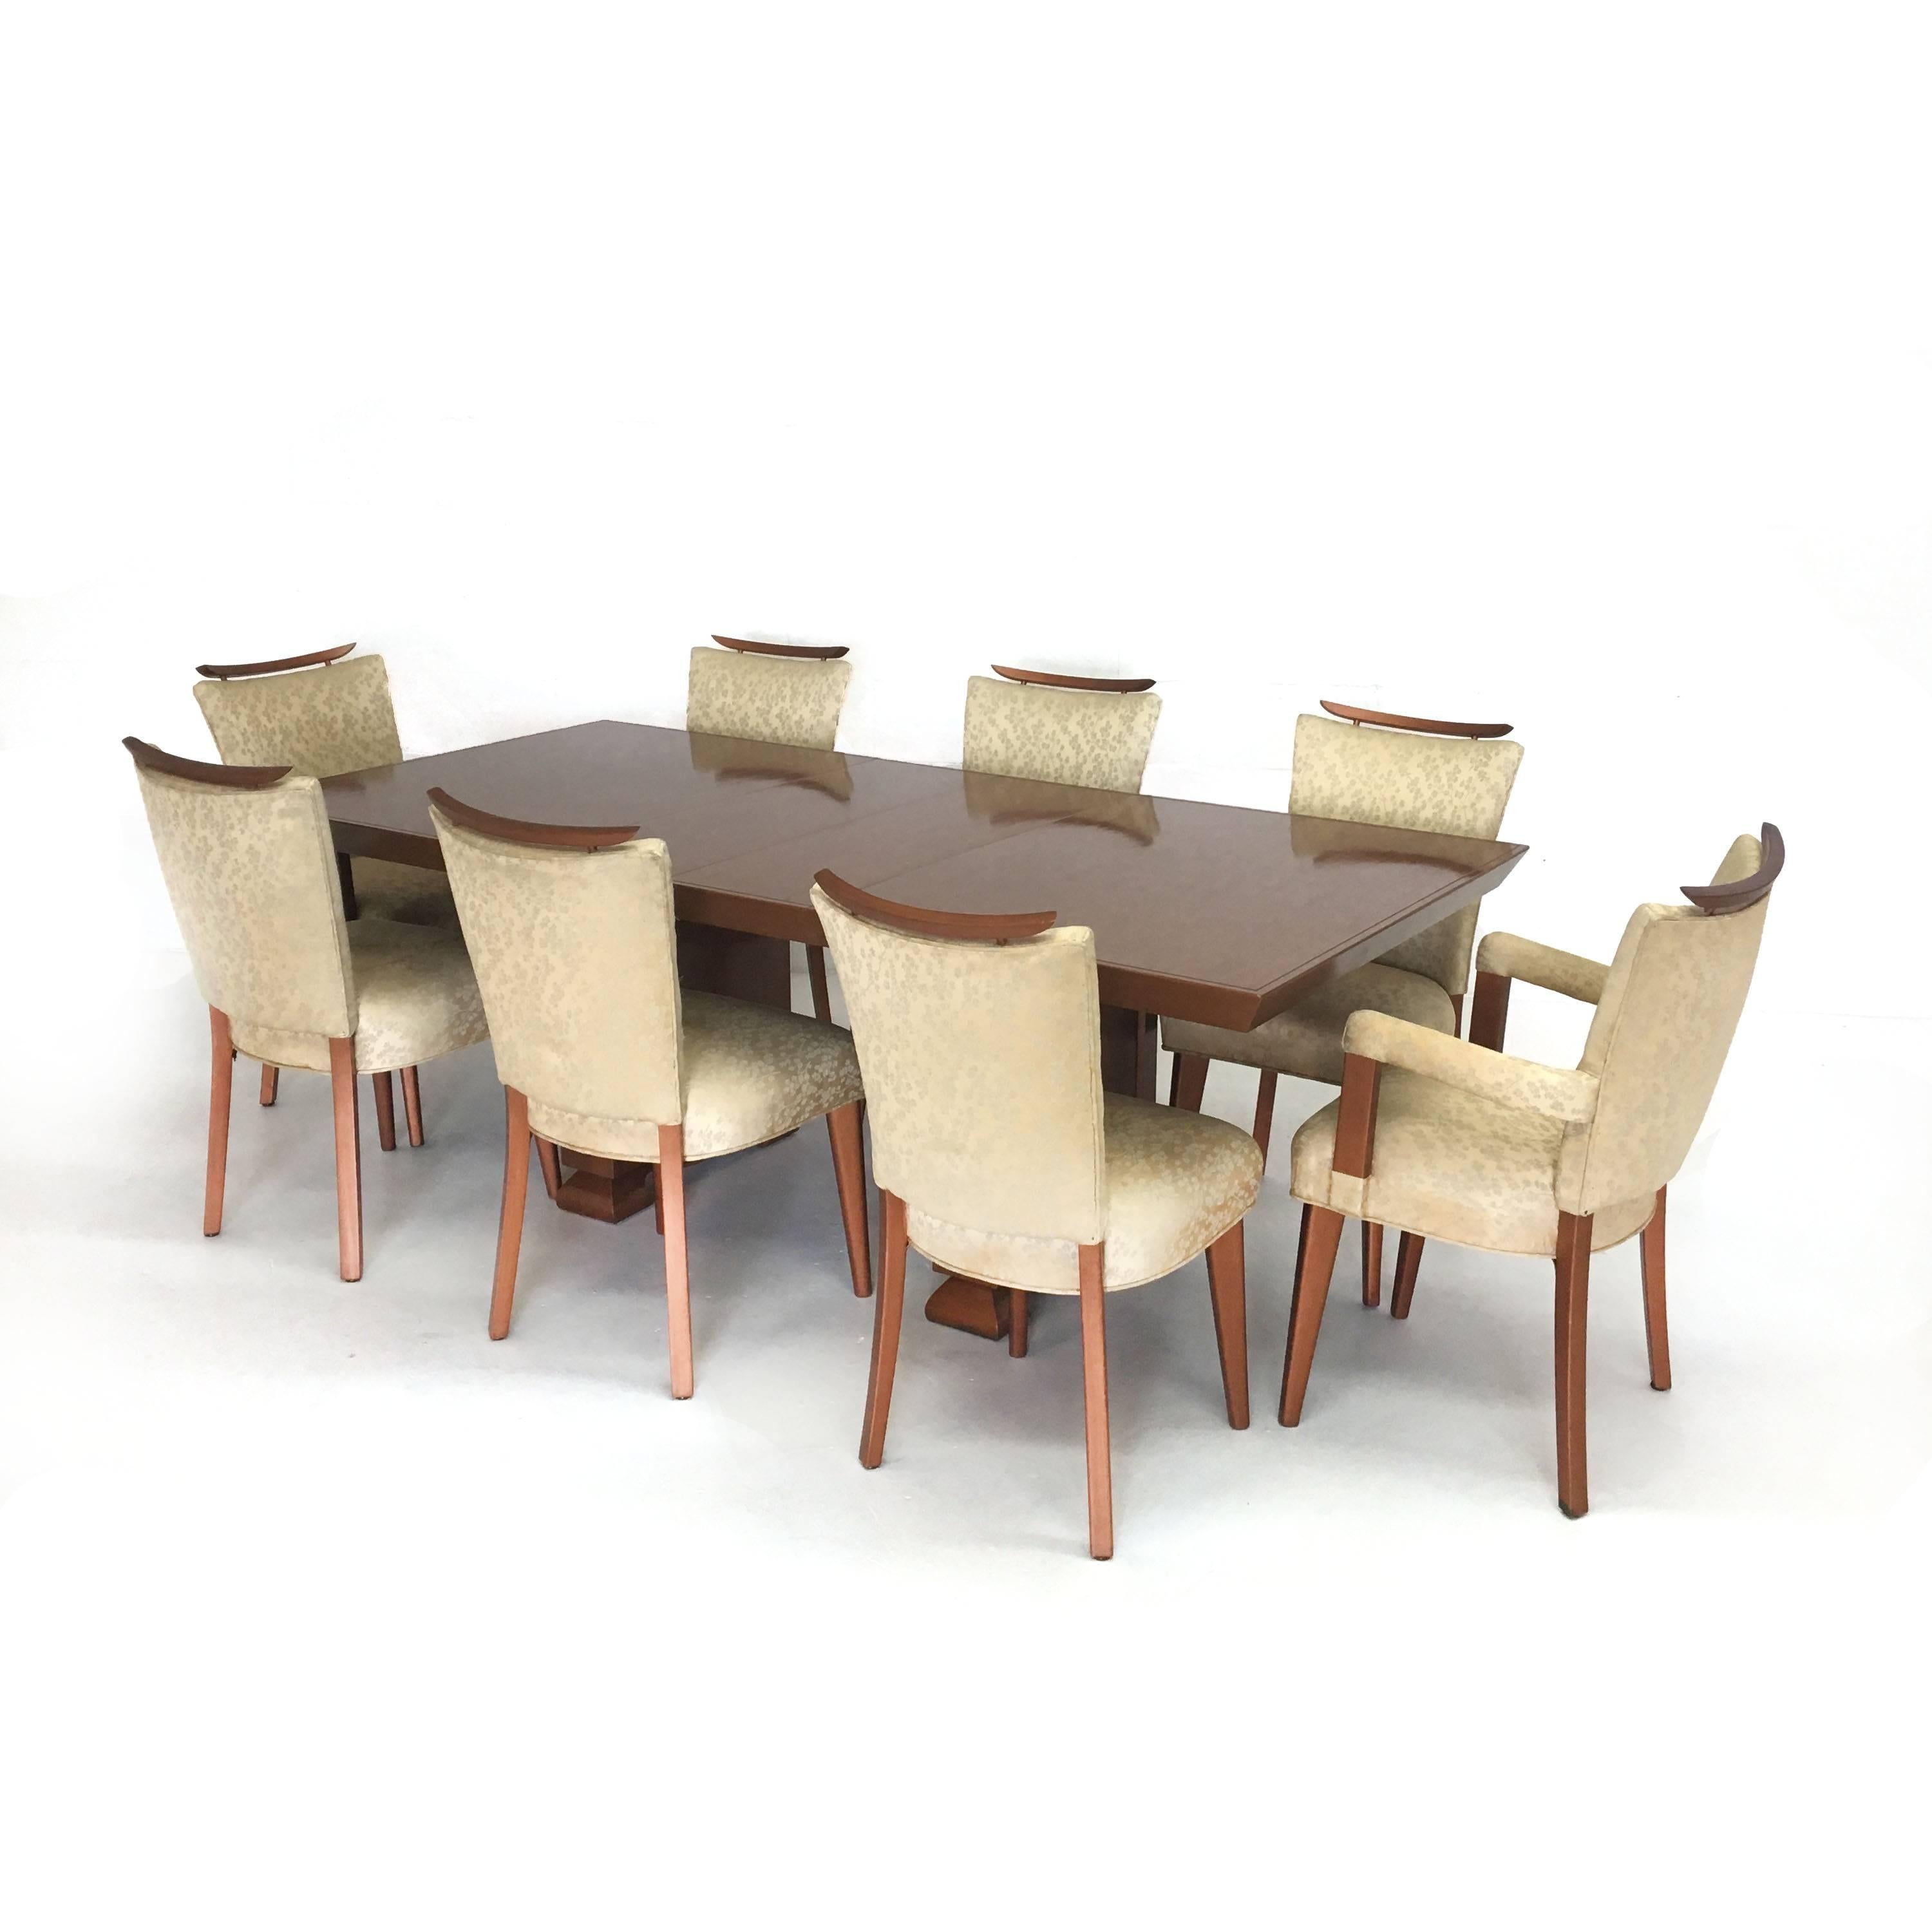 Rare Mid-Century dining table and eight chairs in the style of James Mont in a copper finish. Table comes with two leaves expanding to 83.5